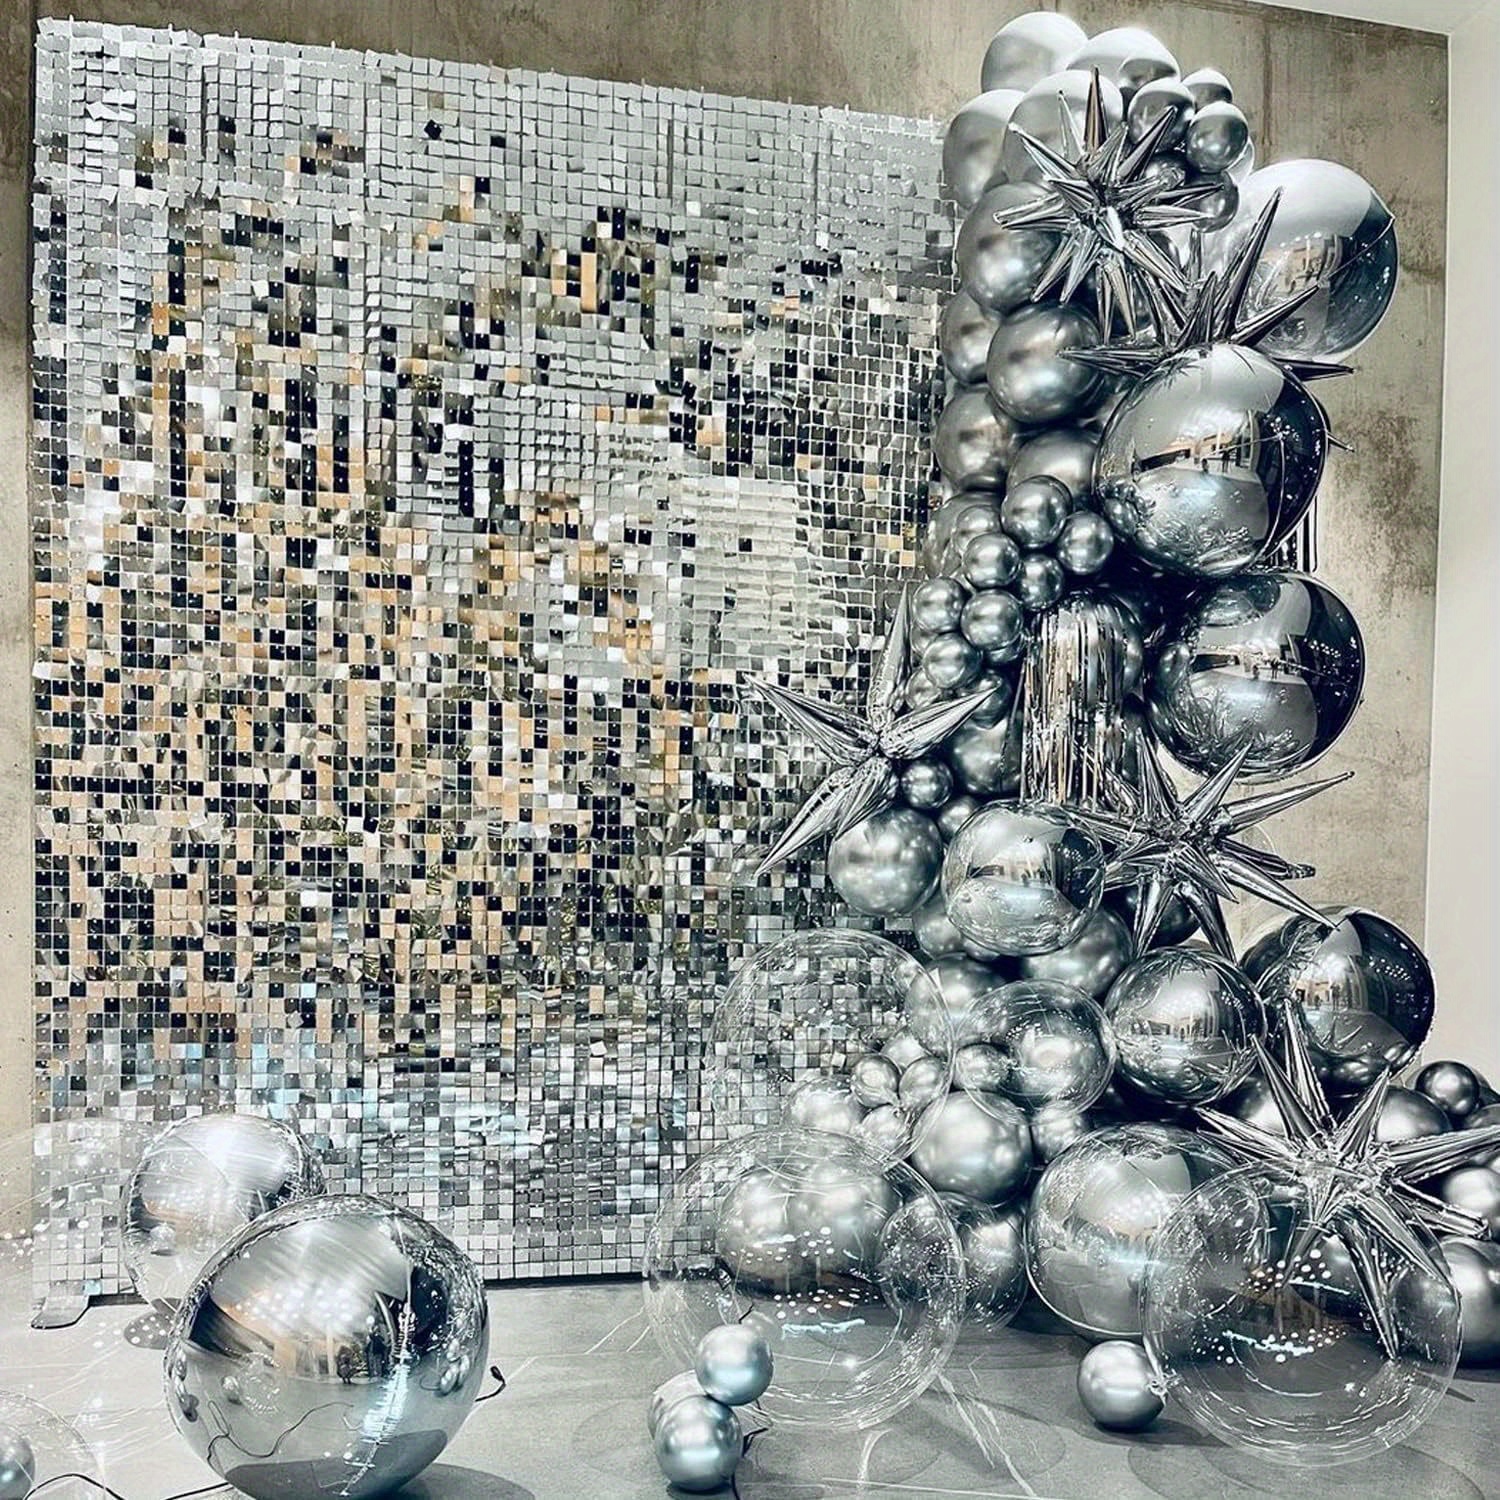  Silver Shimmer Wall Backdrop Sequin Wall Panels Square Wall  Backdrop Decoration for Birthday, Wedding Anniversary Party,12 Pieces :  Electronics